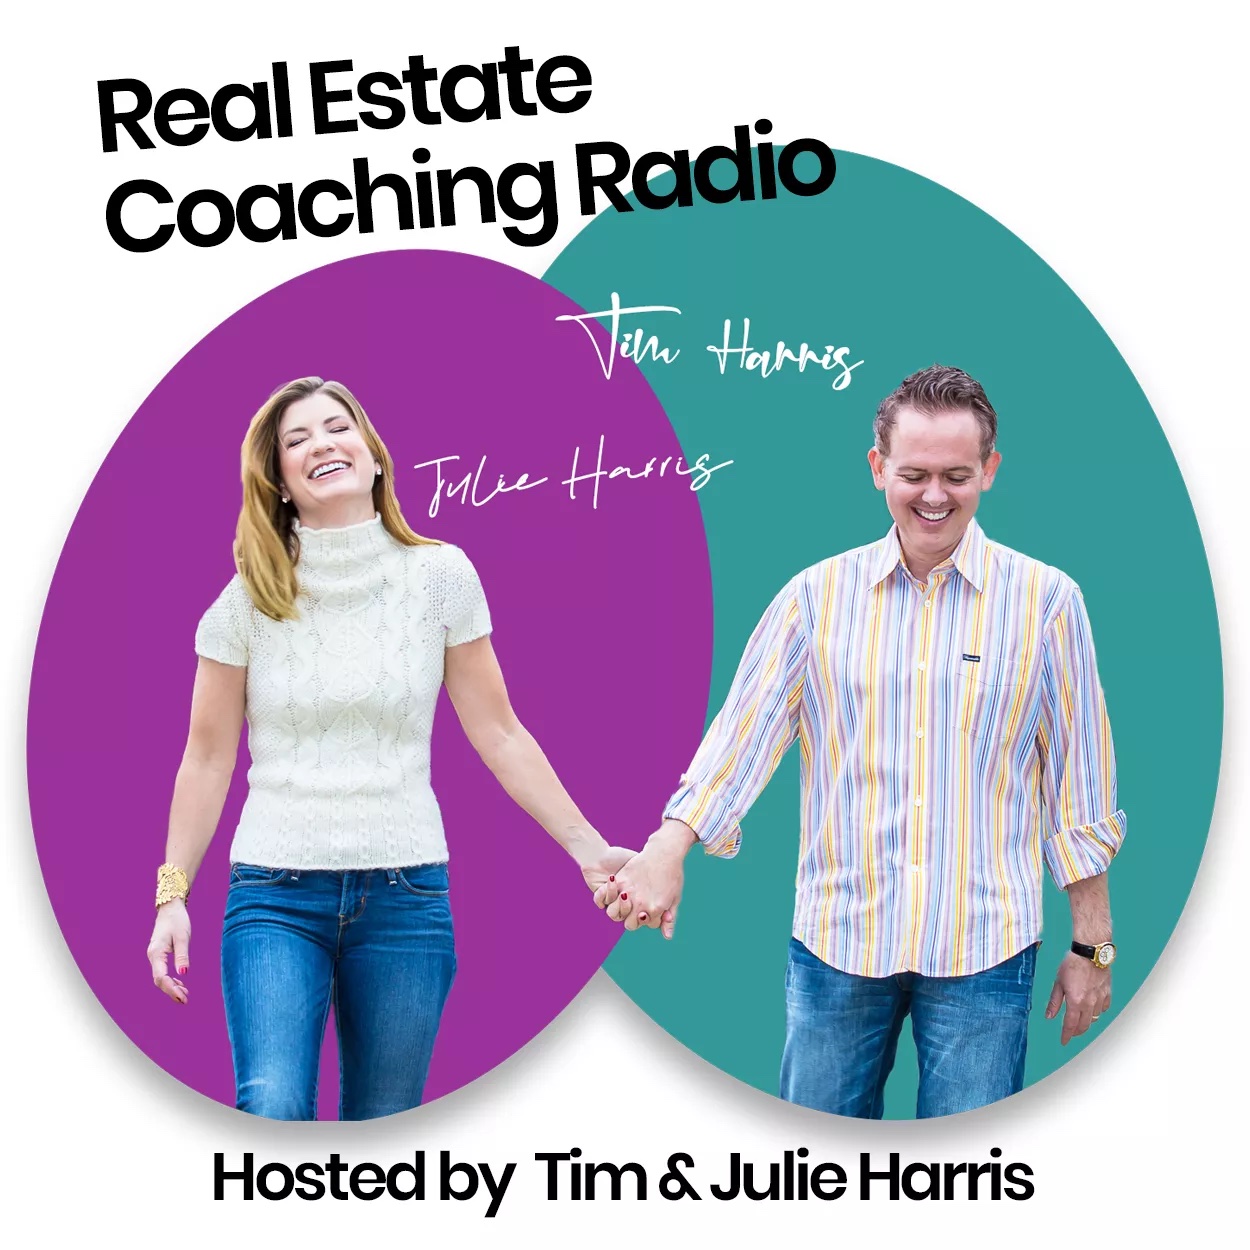 Fresh update on "mls" discussed on Real Estate Coaching Radio